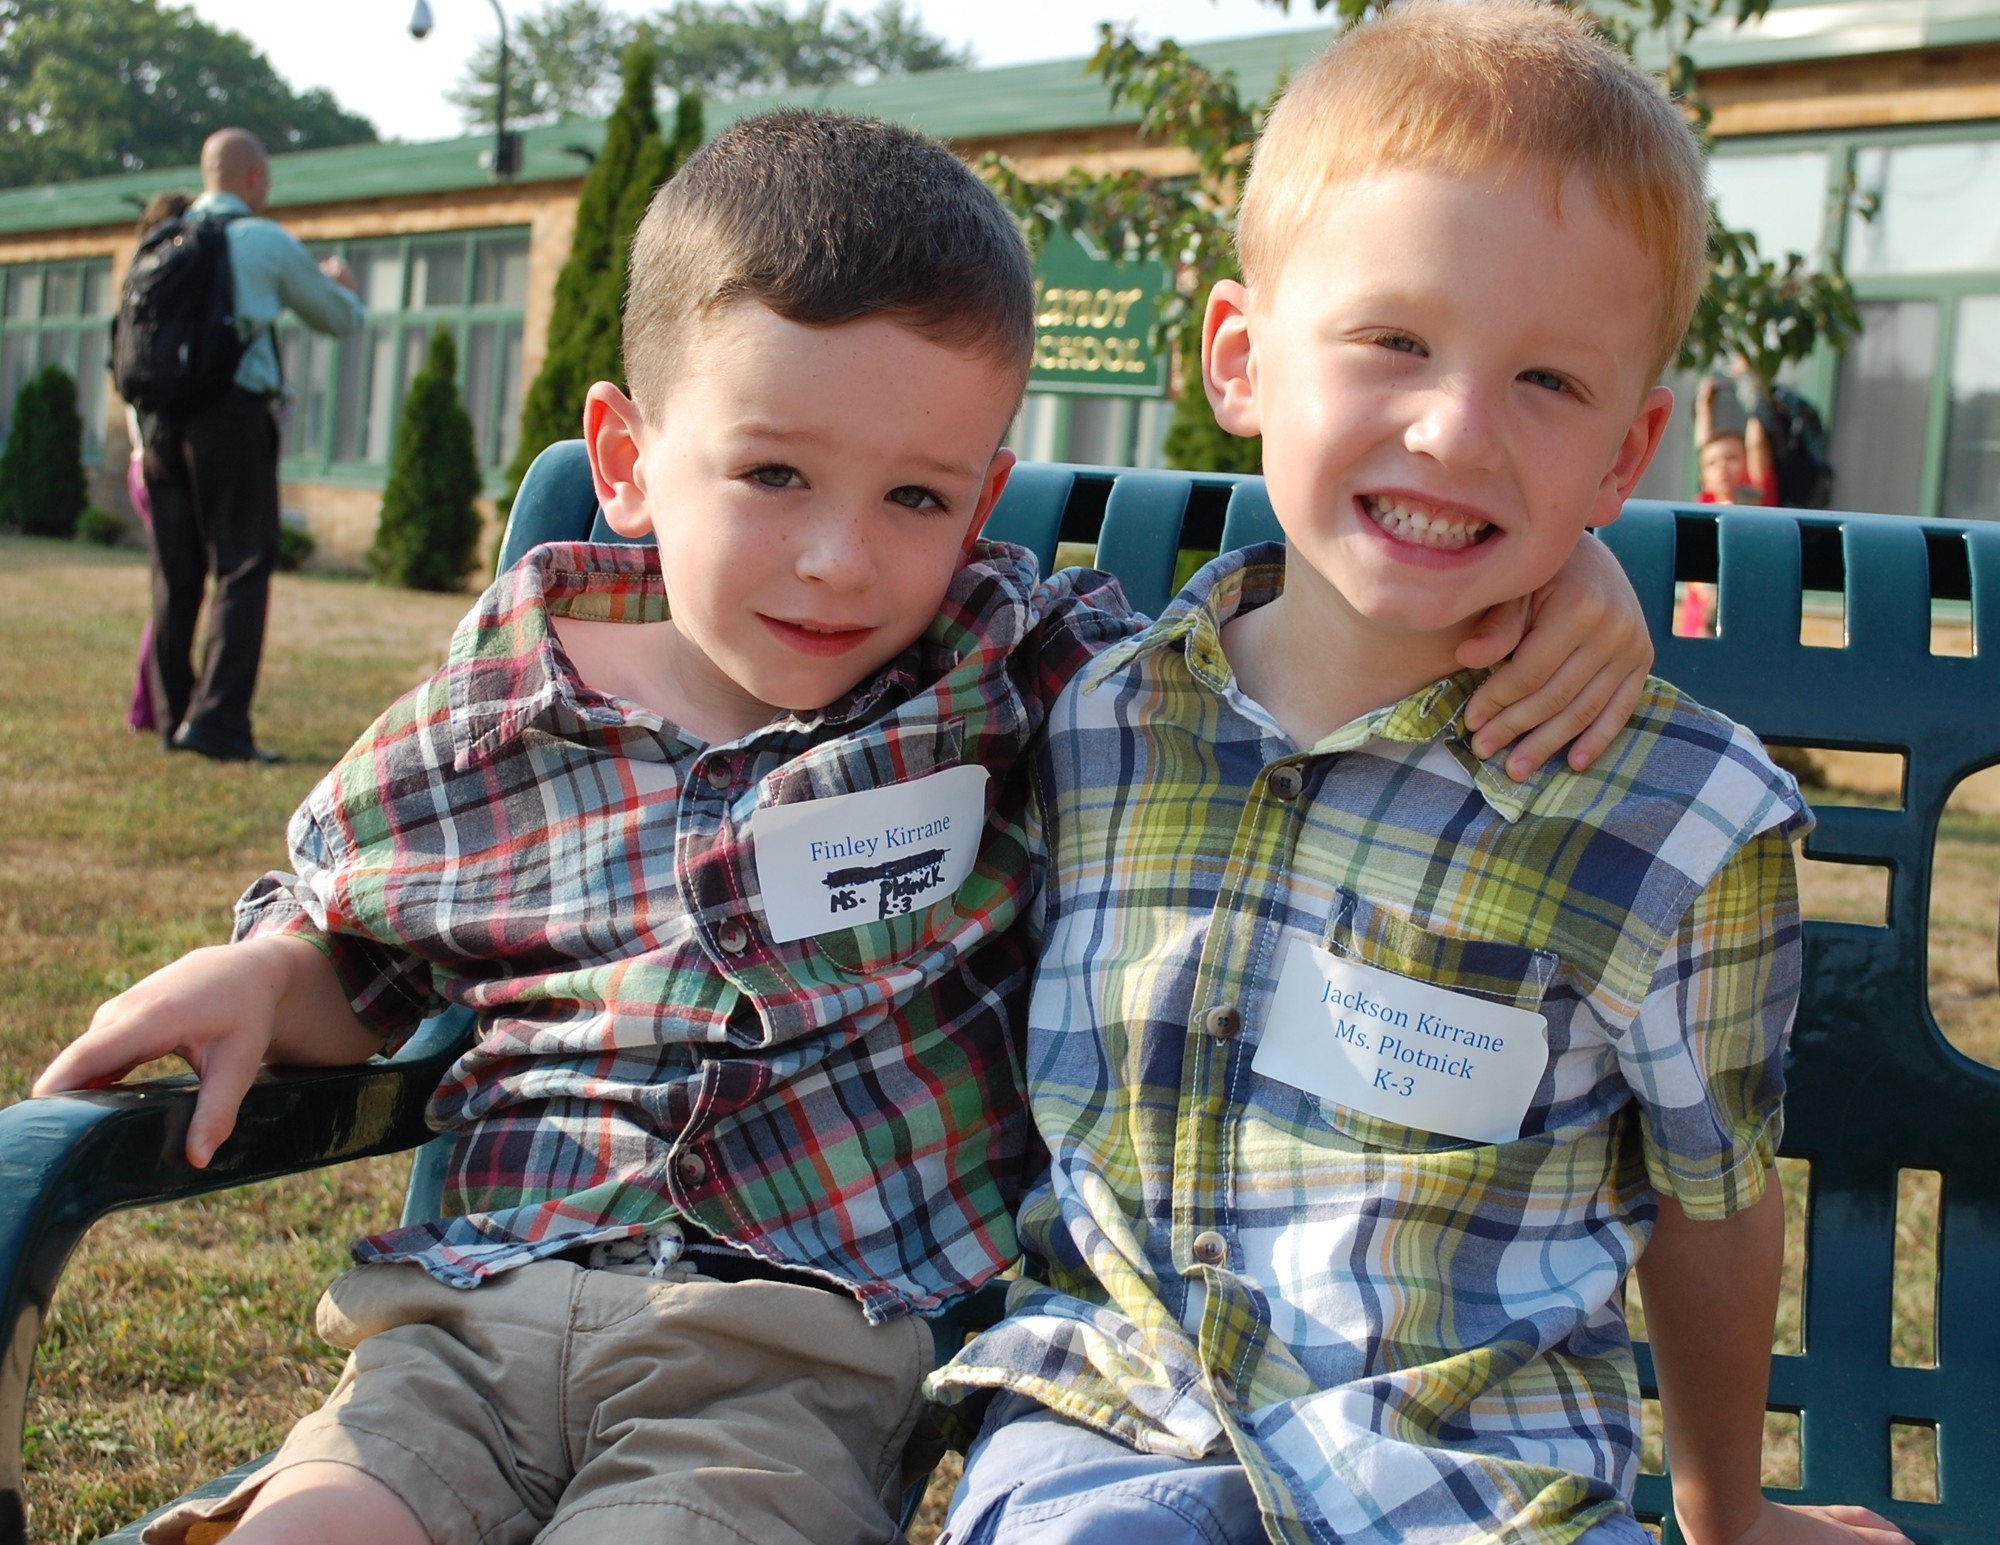 Finley and Jackson Kirrane started kindergarten together at the Seaford Manor School on Sept. 2.